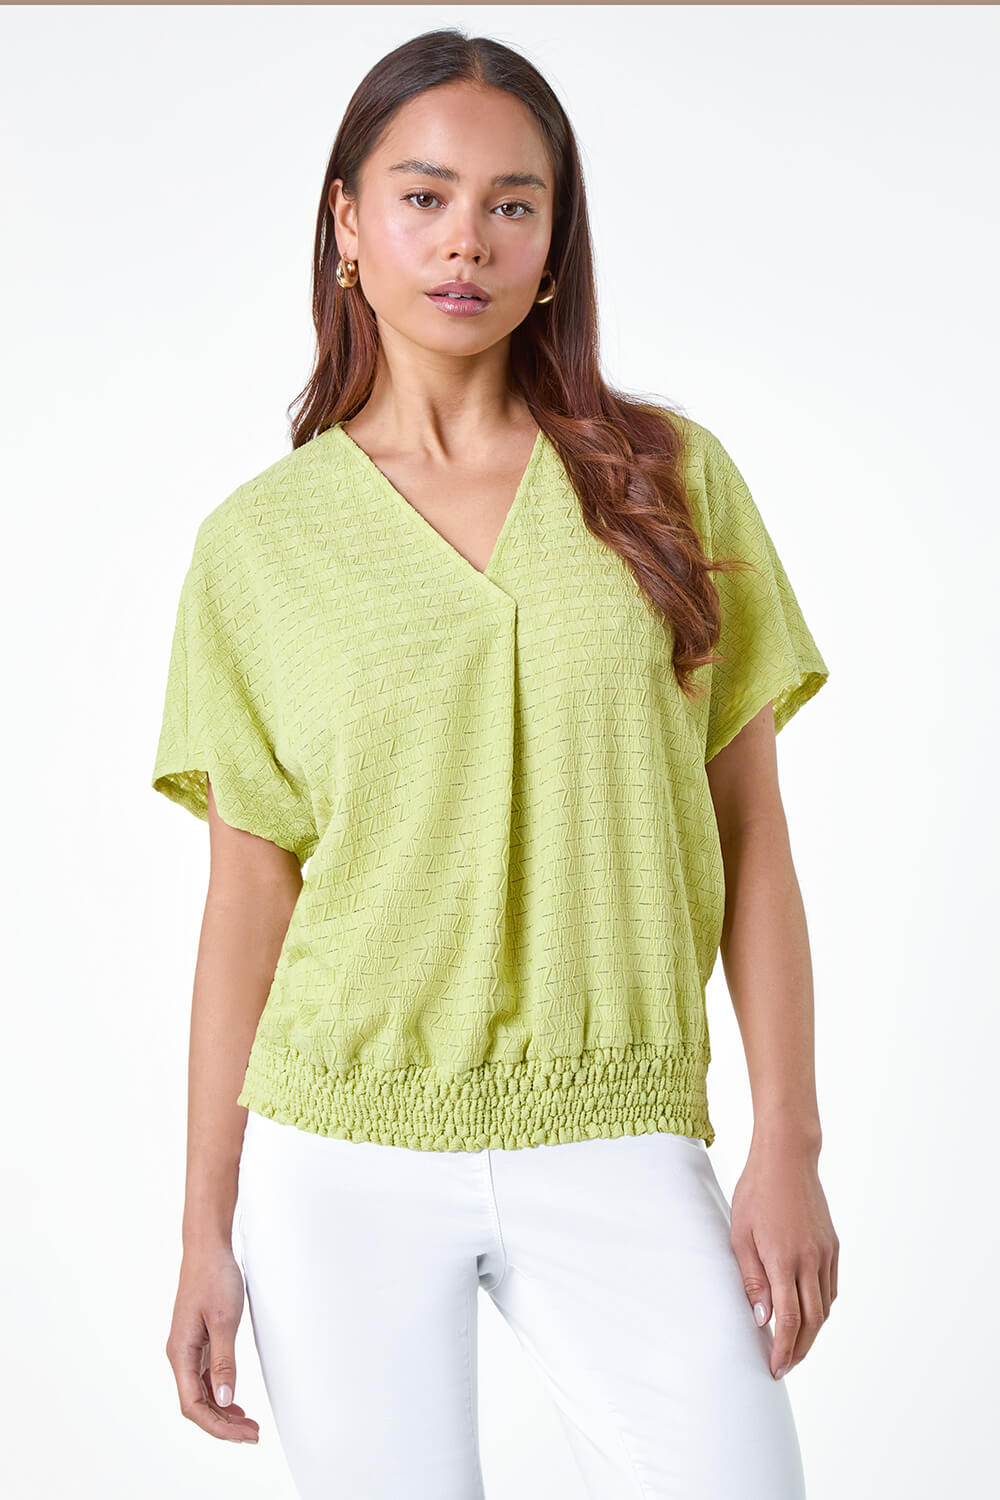 Sage Petite Textured Shirred Stretch Top, Image 4 of 5